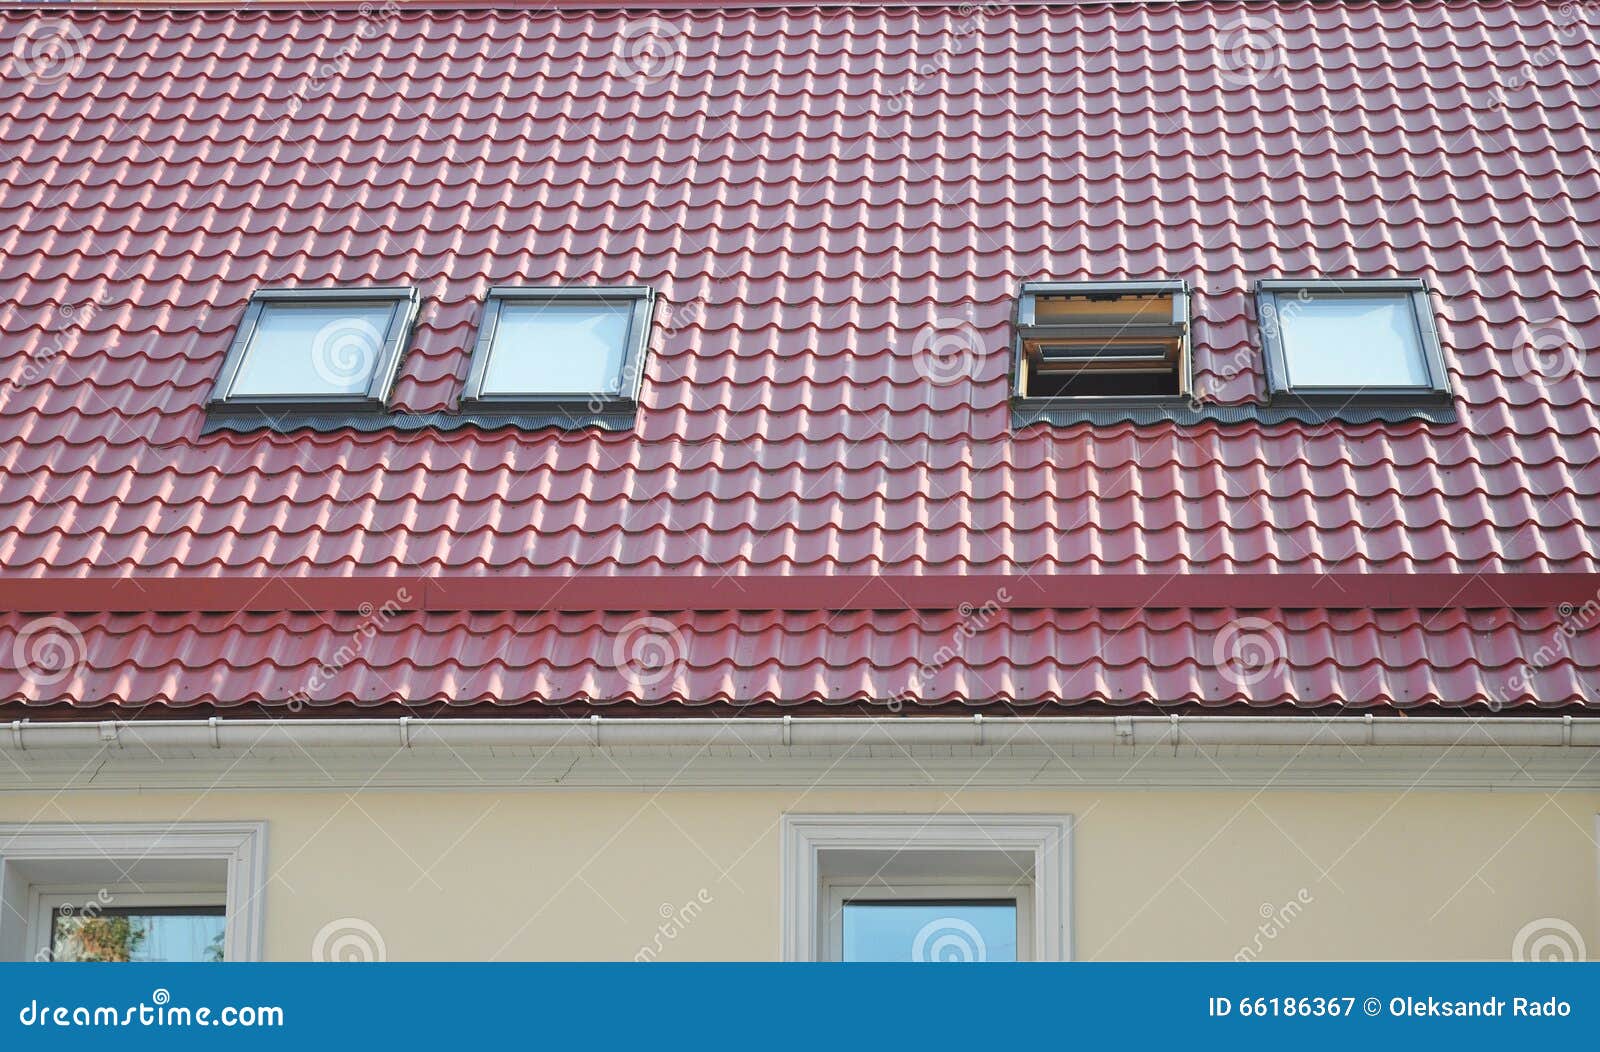 red metal tiled roof with new dormers, roof windows, skylights, rain gutter system and roof protection from snow board